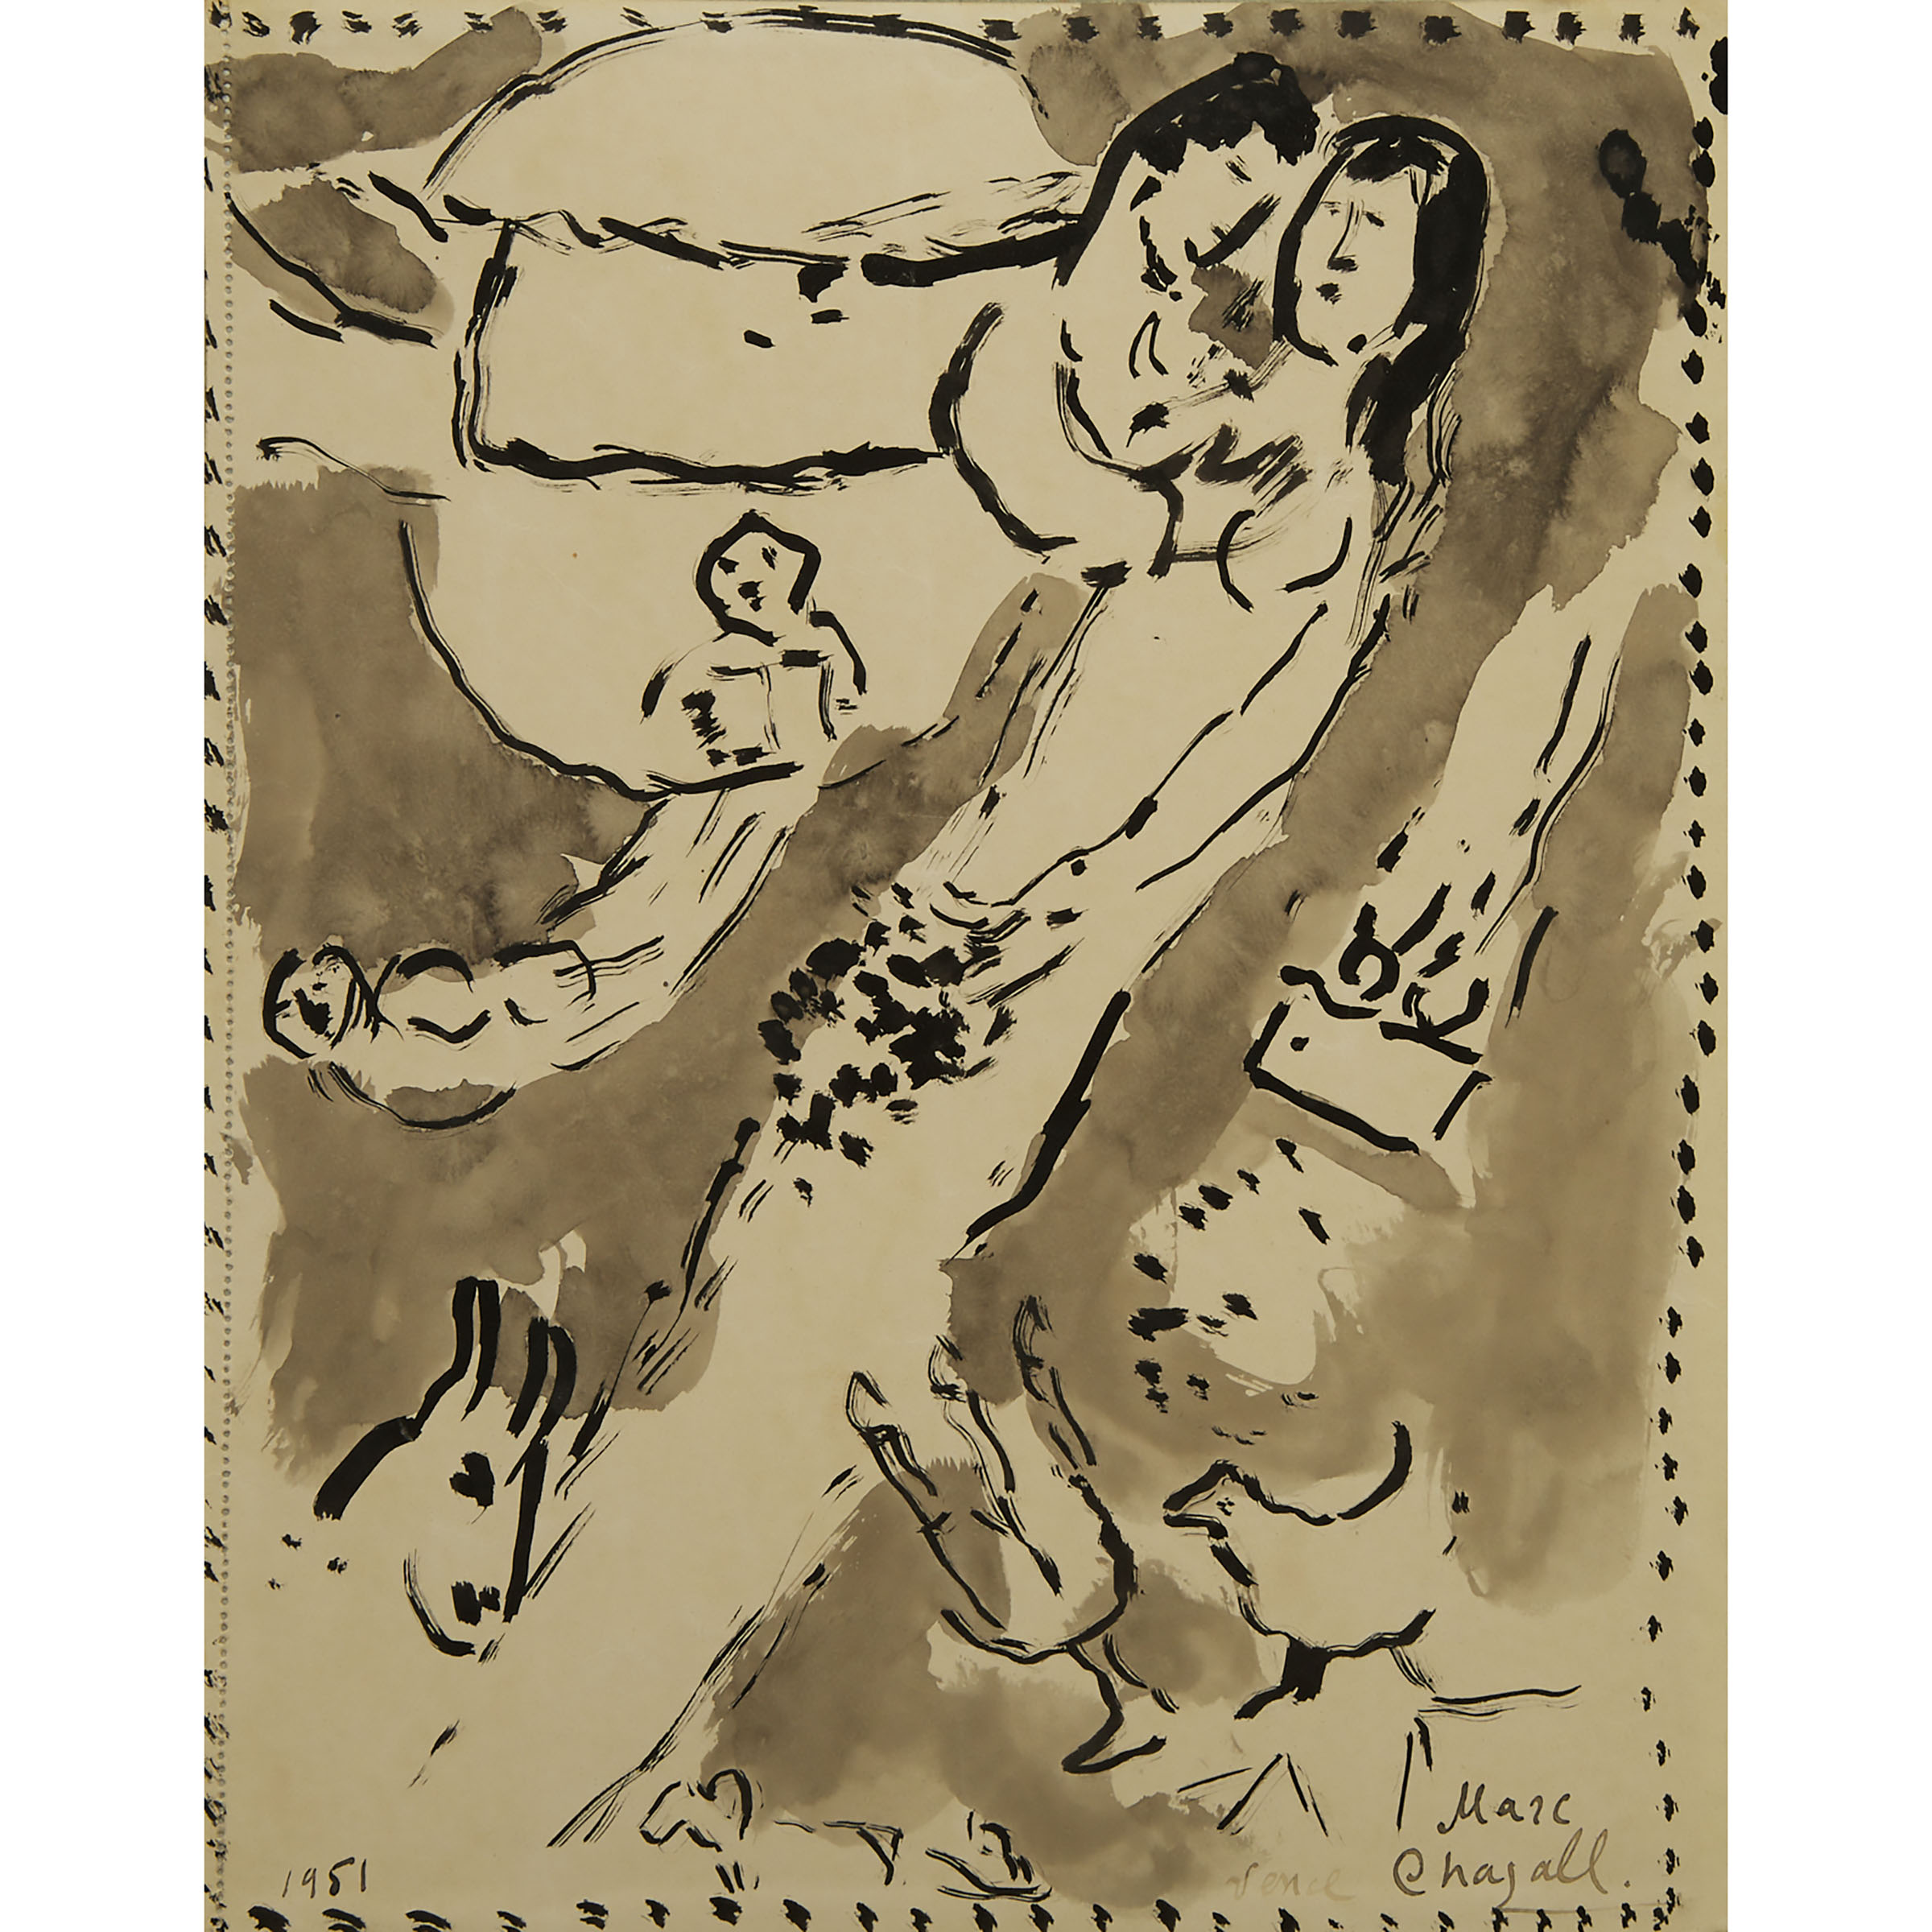 Attributed to Marc Chagall (1887-1985)